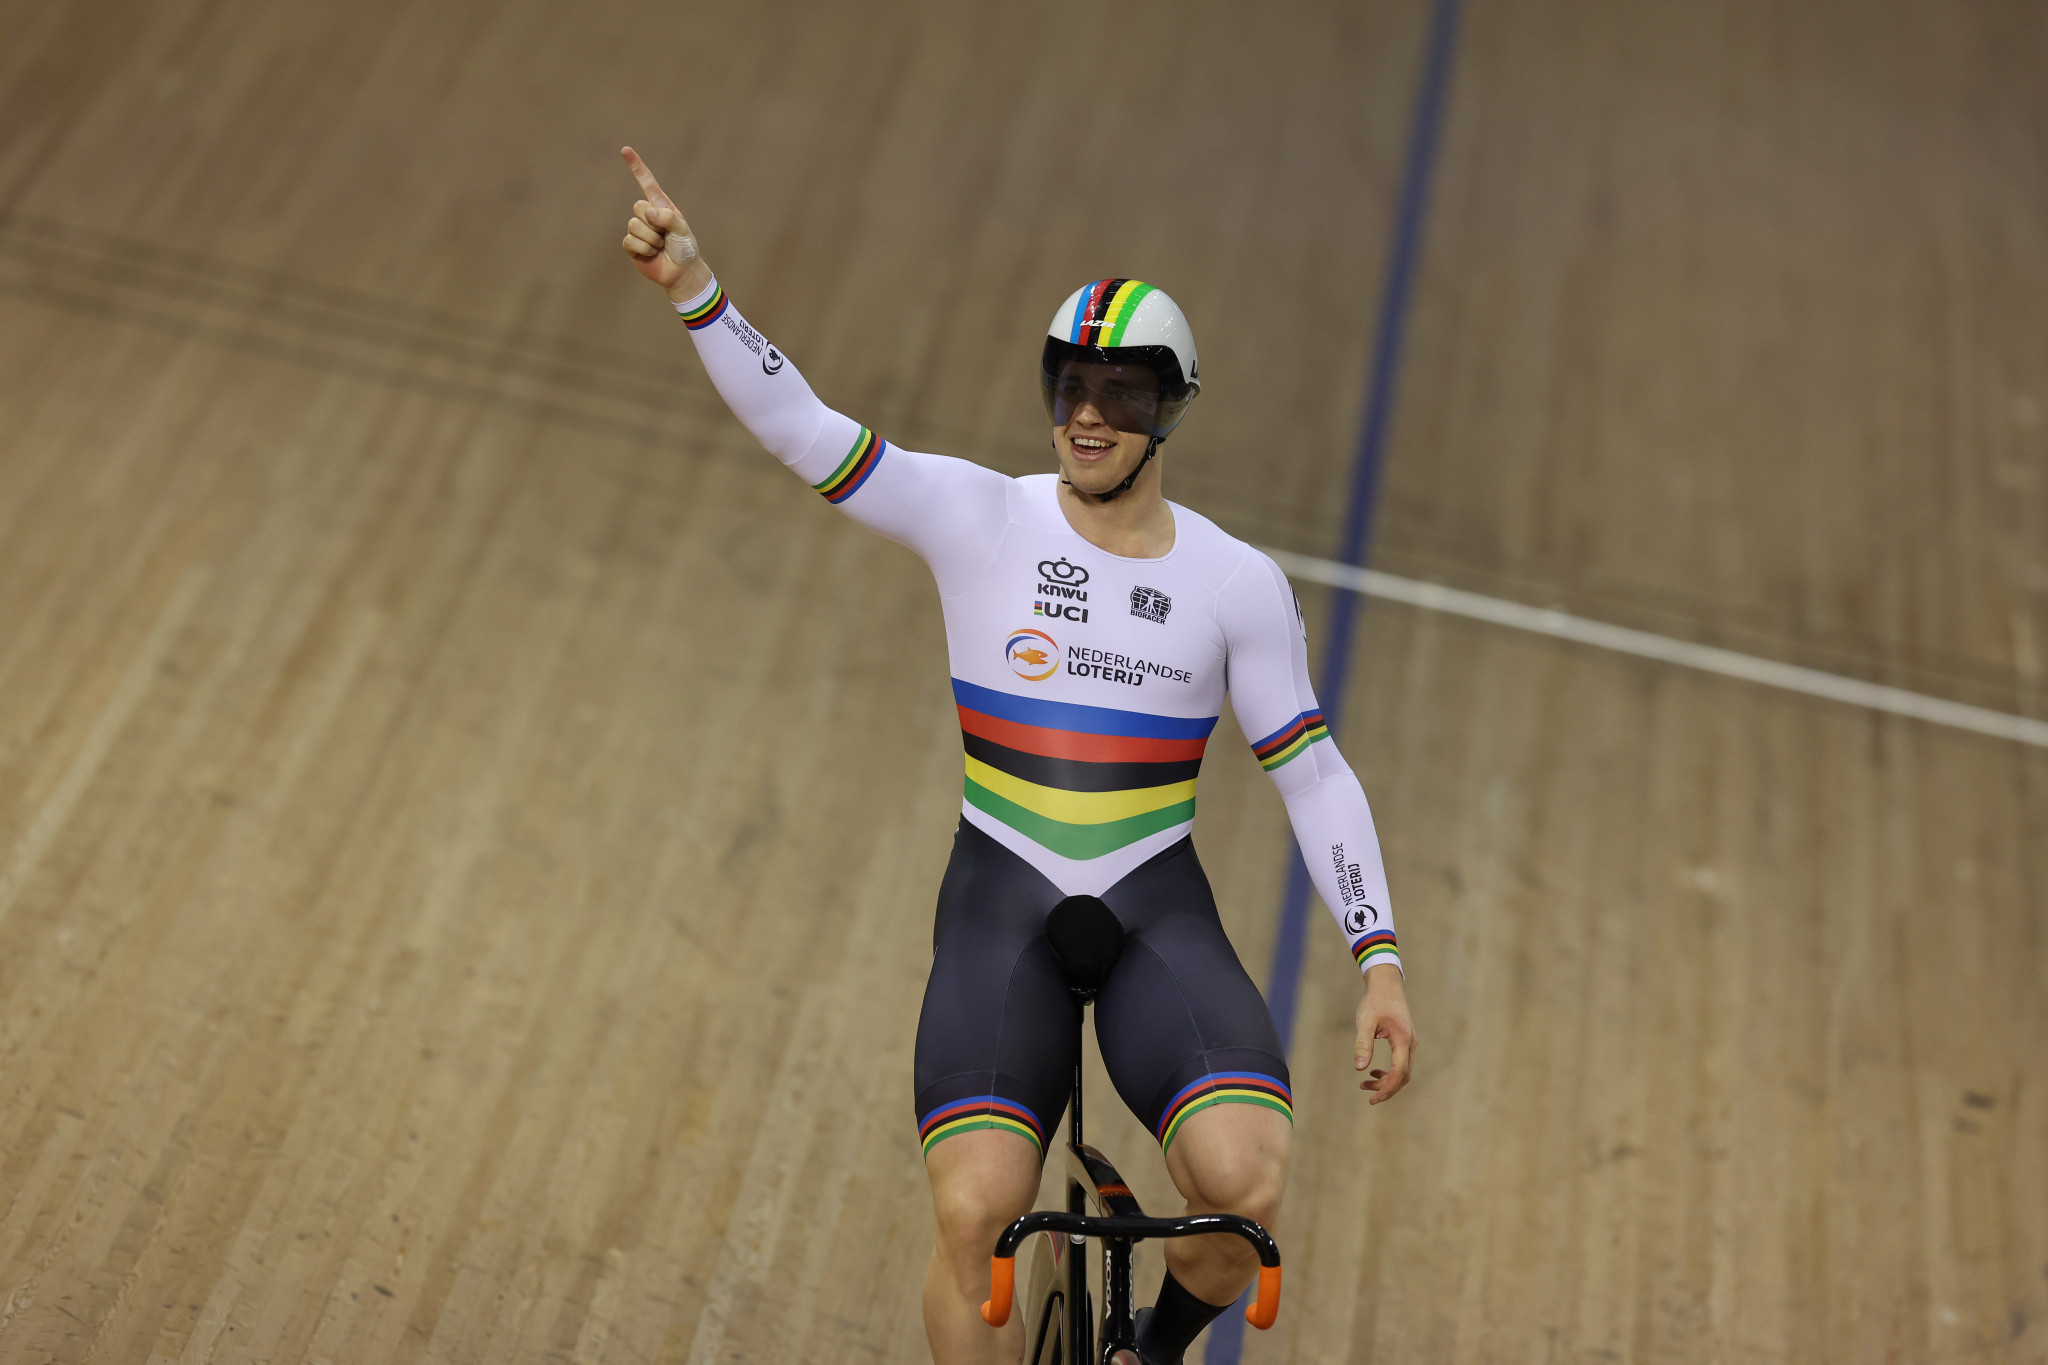 Harrie Lavreysen is among the favourites for gold in the final leg of the UCI Track Cycling Nations Cup in Cali ©Getty Images